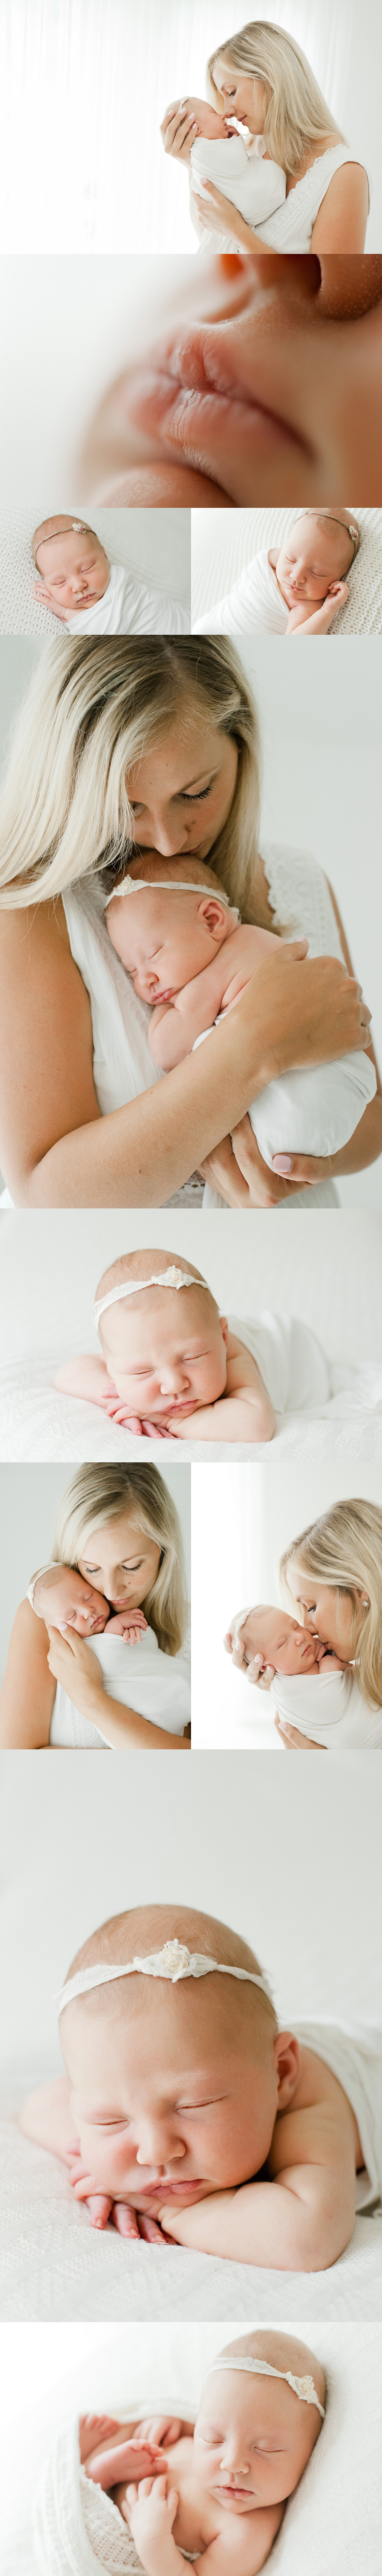 newborn baby photographed with her mother in white studio